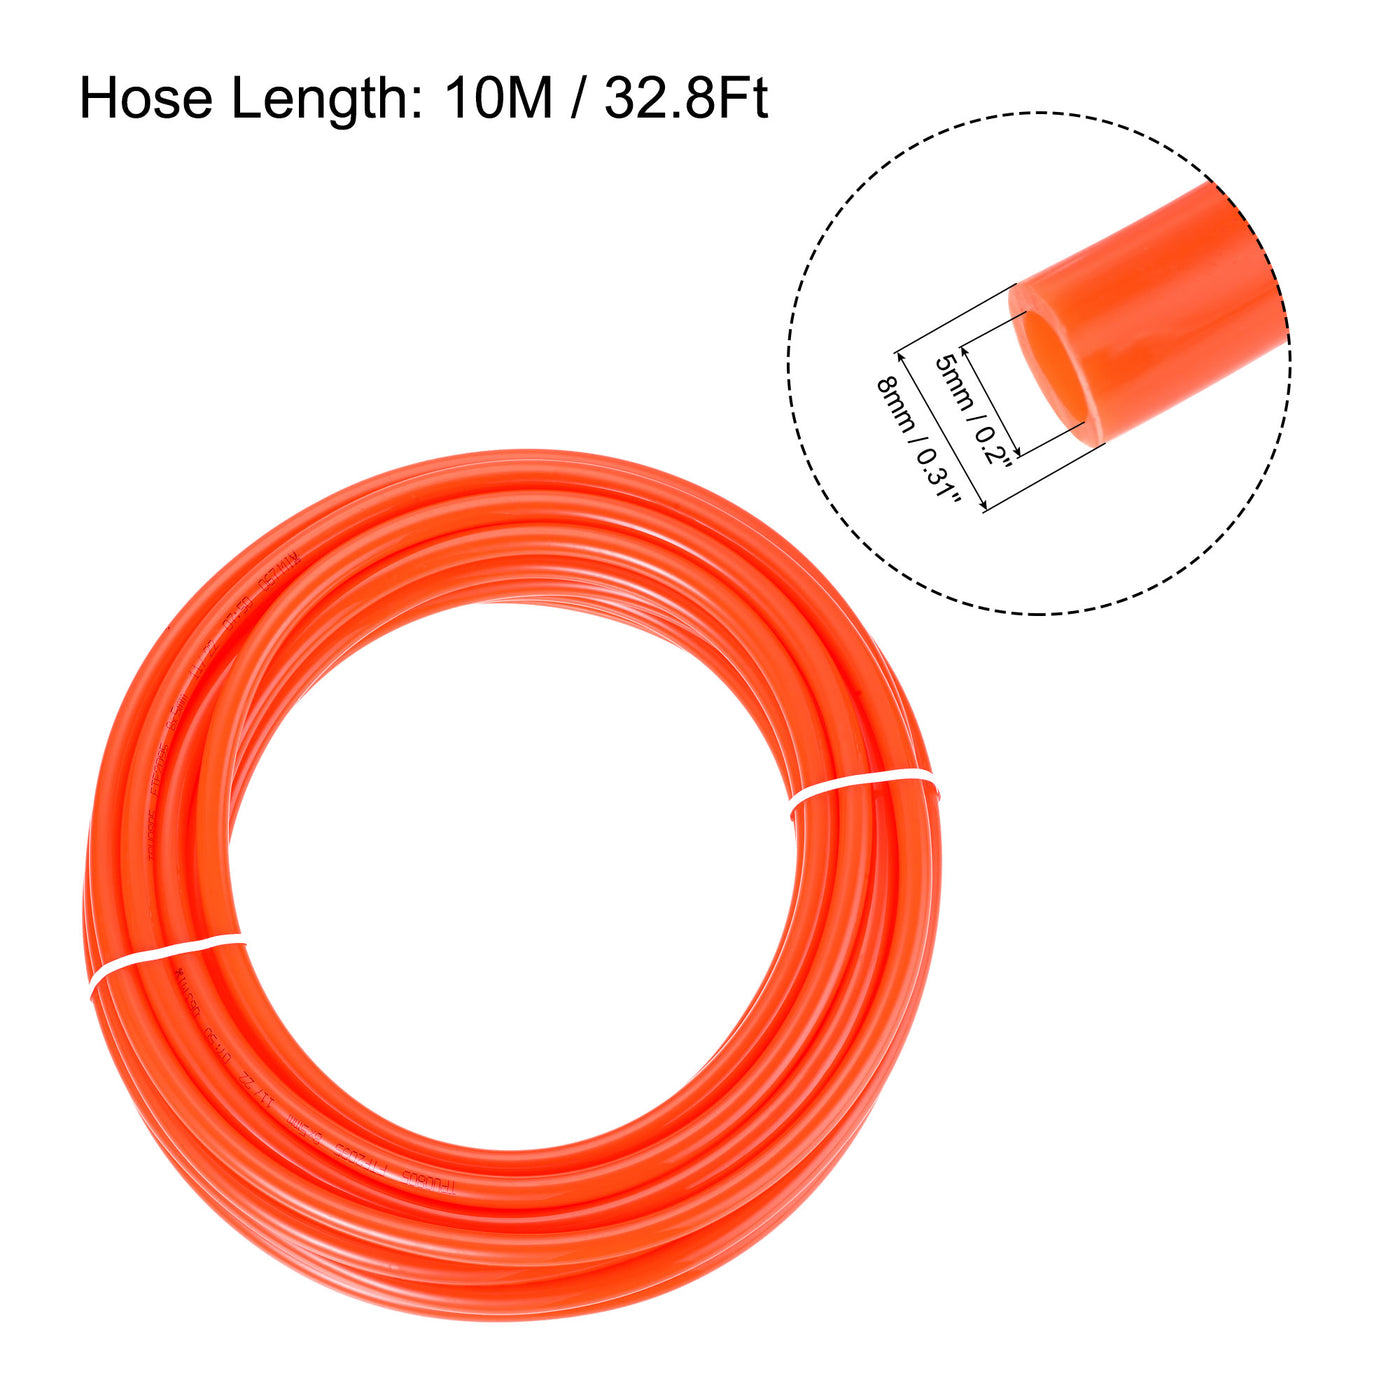 Uxcell Uxcell Pneumatic 8mm OD Polyurethane PU Air Hose Tubing Kit 10 Meters Orange with 16 Pcs Push to Connect Fittings